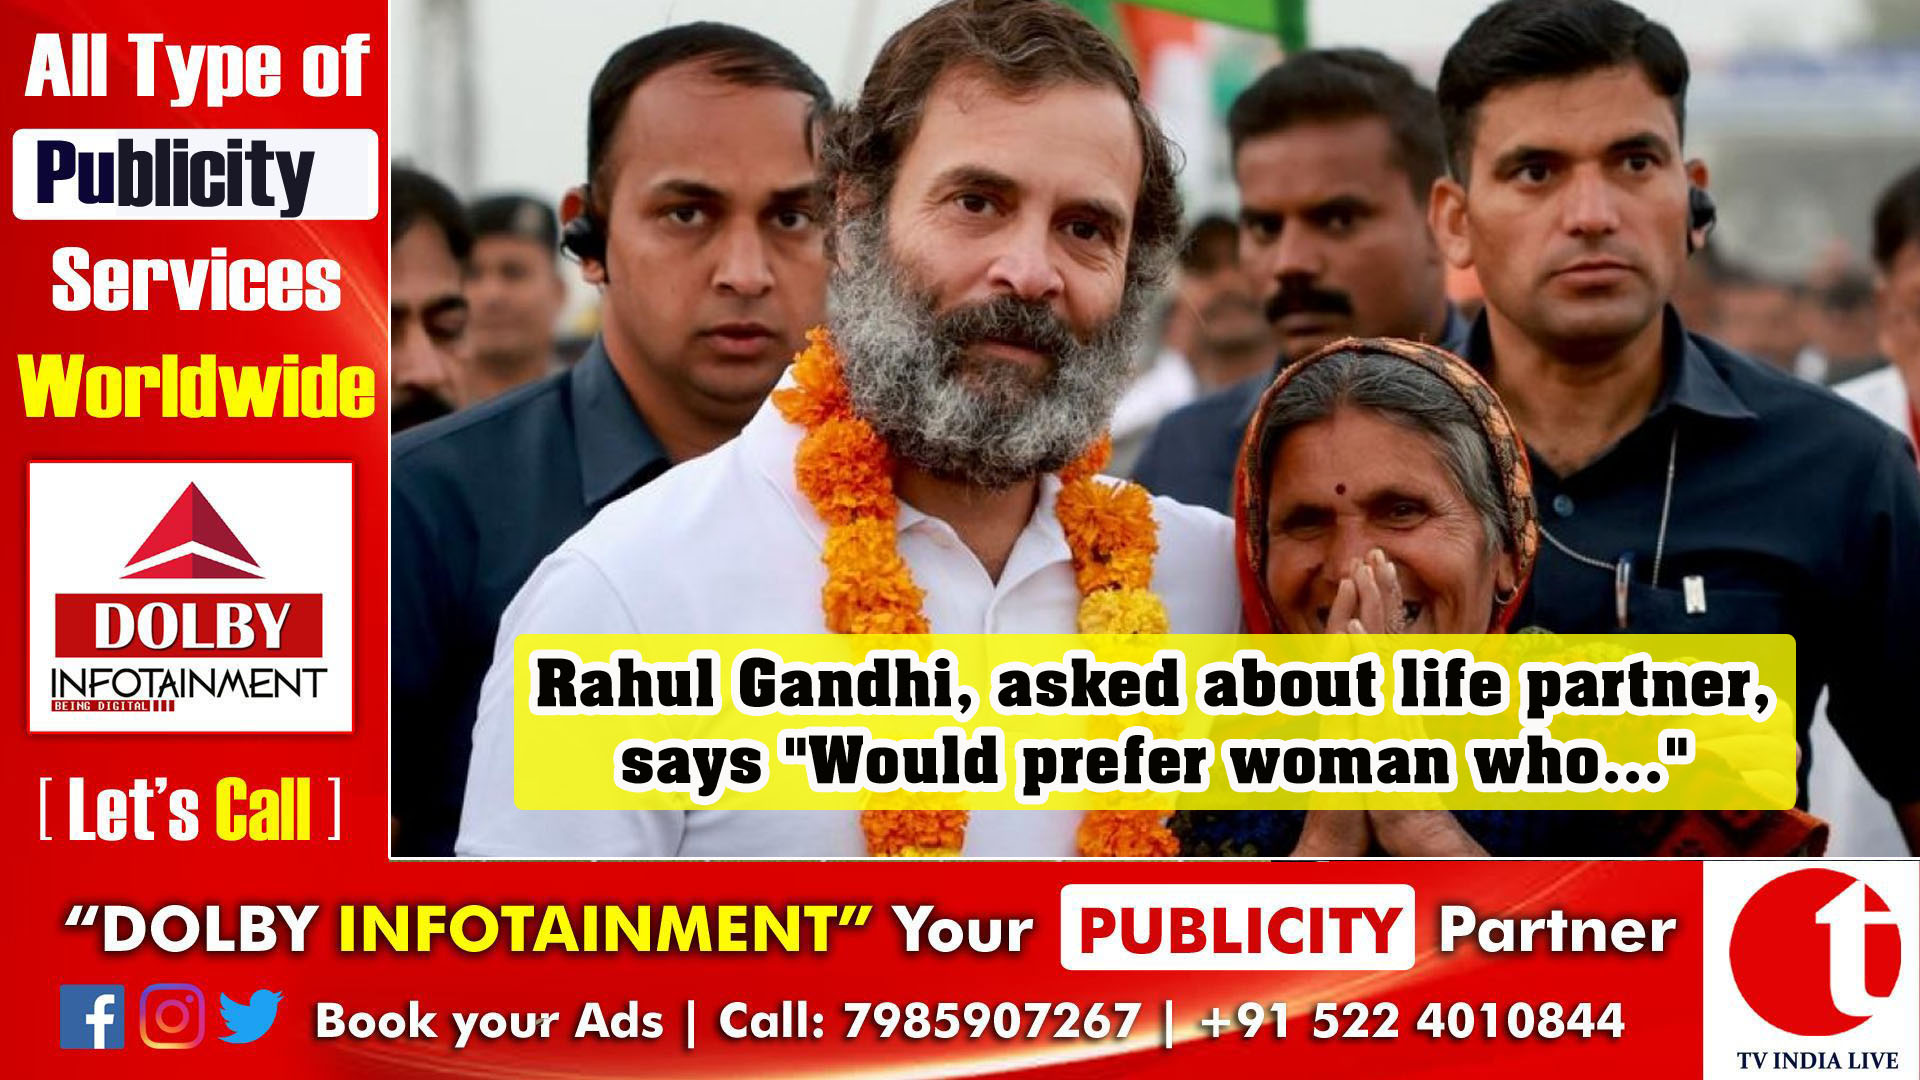 Rahul Gandhi, asked about life partner, says "Would prefer woman who..."